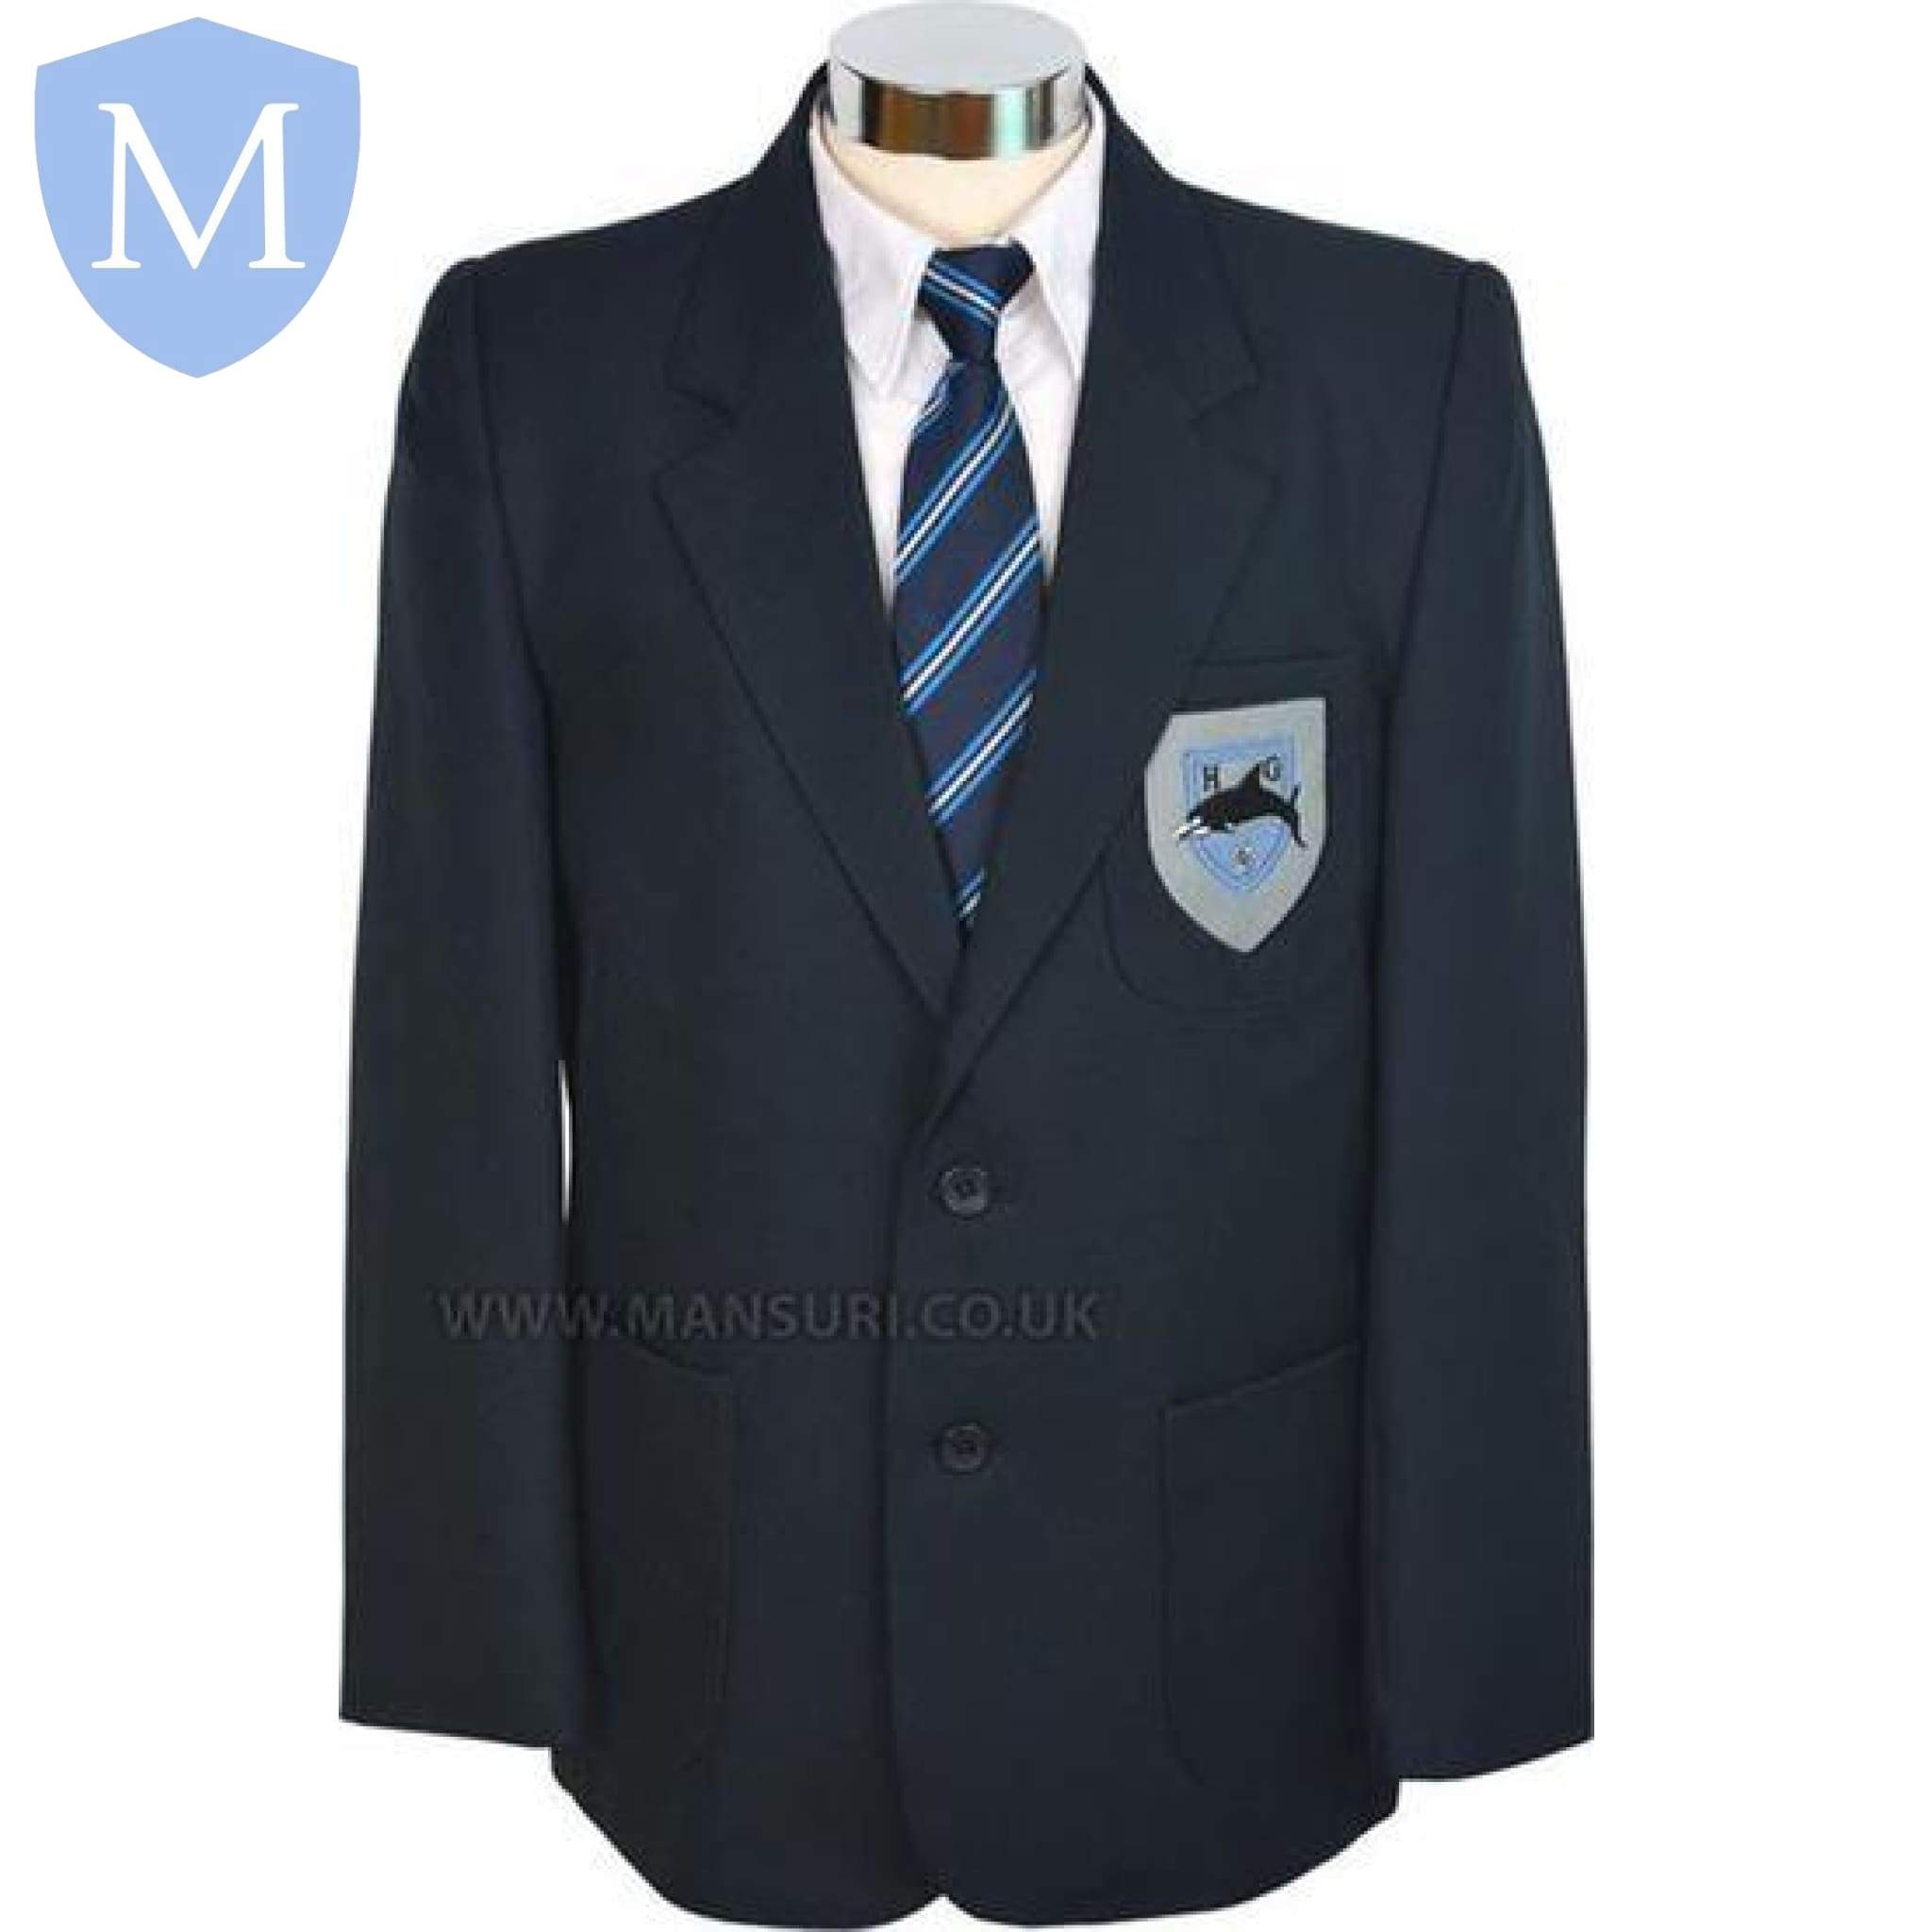 Hall Green Secondary Boys Blazers Chest 29 (9/10 Years),Chest 26 (7/8 Years),Chest 27 (7/8 Years),Chest 28 (9/10 Years),Chest 30 (9/10 Years),Chest 31 (11/12 Years),Chest 32 (11/12 Years),Chest 33 (11/12 Years),Chest 34 (13 Years),Chest 35 (13 Years),Chest 36 (13 Years),Chest 37 (14 Years),Chest 38 (14/16 Years),Chest 39 (14/16 Years),Chest 40,Chest 41,Chest 42,Chest 44,Chest 46,Chest 48